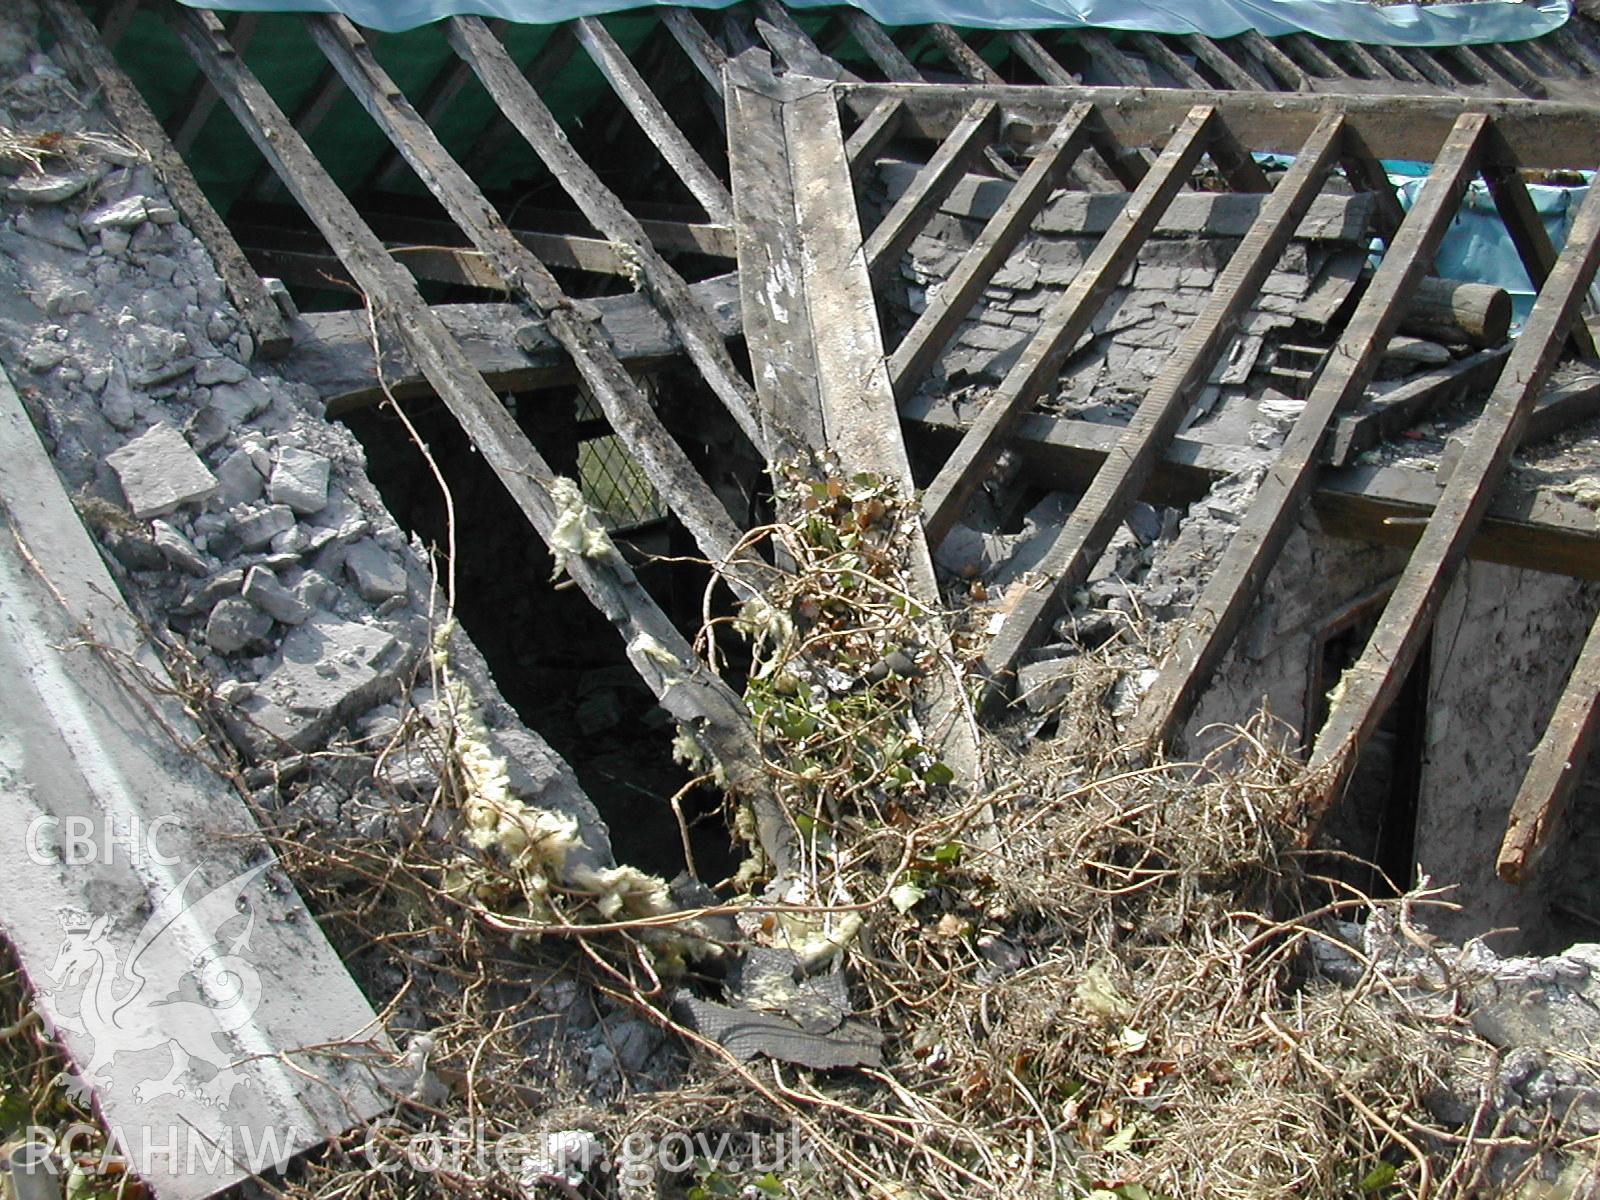 Colour photograph showing detailed exterior view of exposed roof timbers at Rosacre, Gronant, Prestatyn. Unknown date. Donated by the Conservation Department of Flintshire County Council, in advance of relocation to new offices.